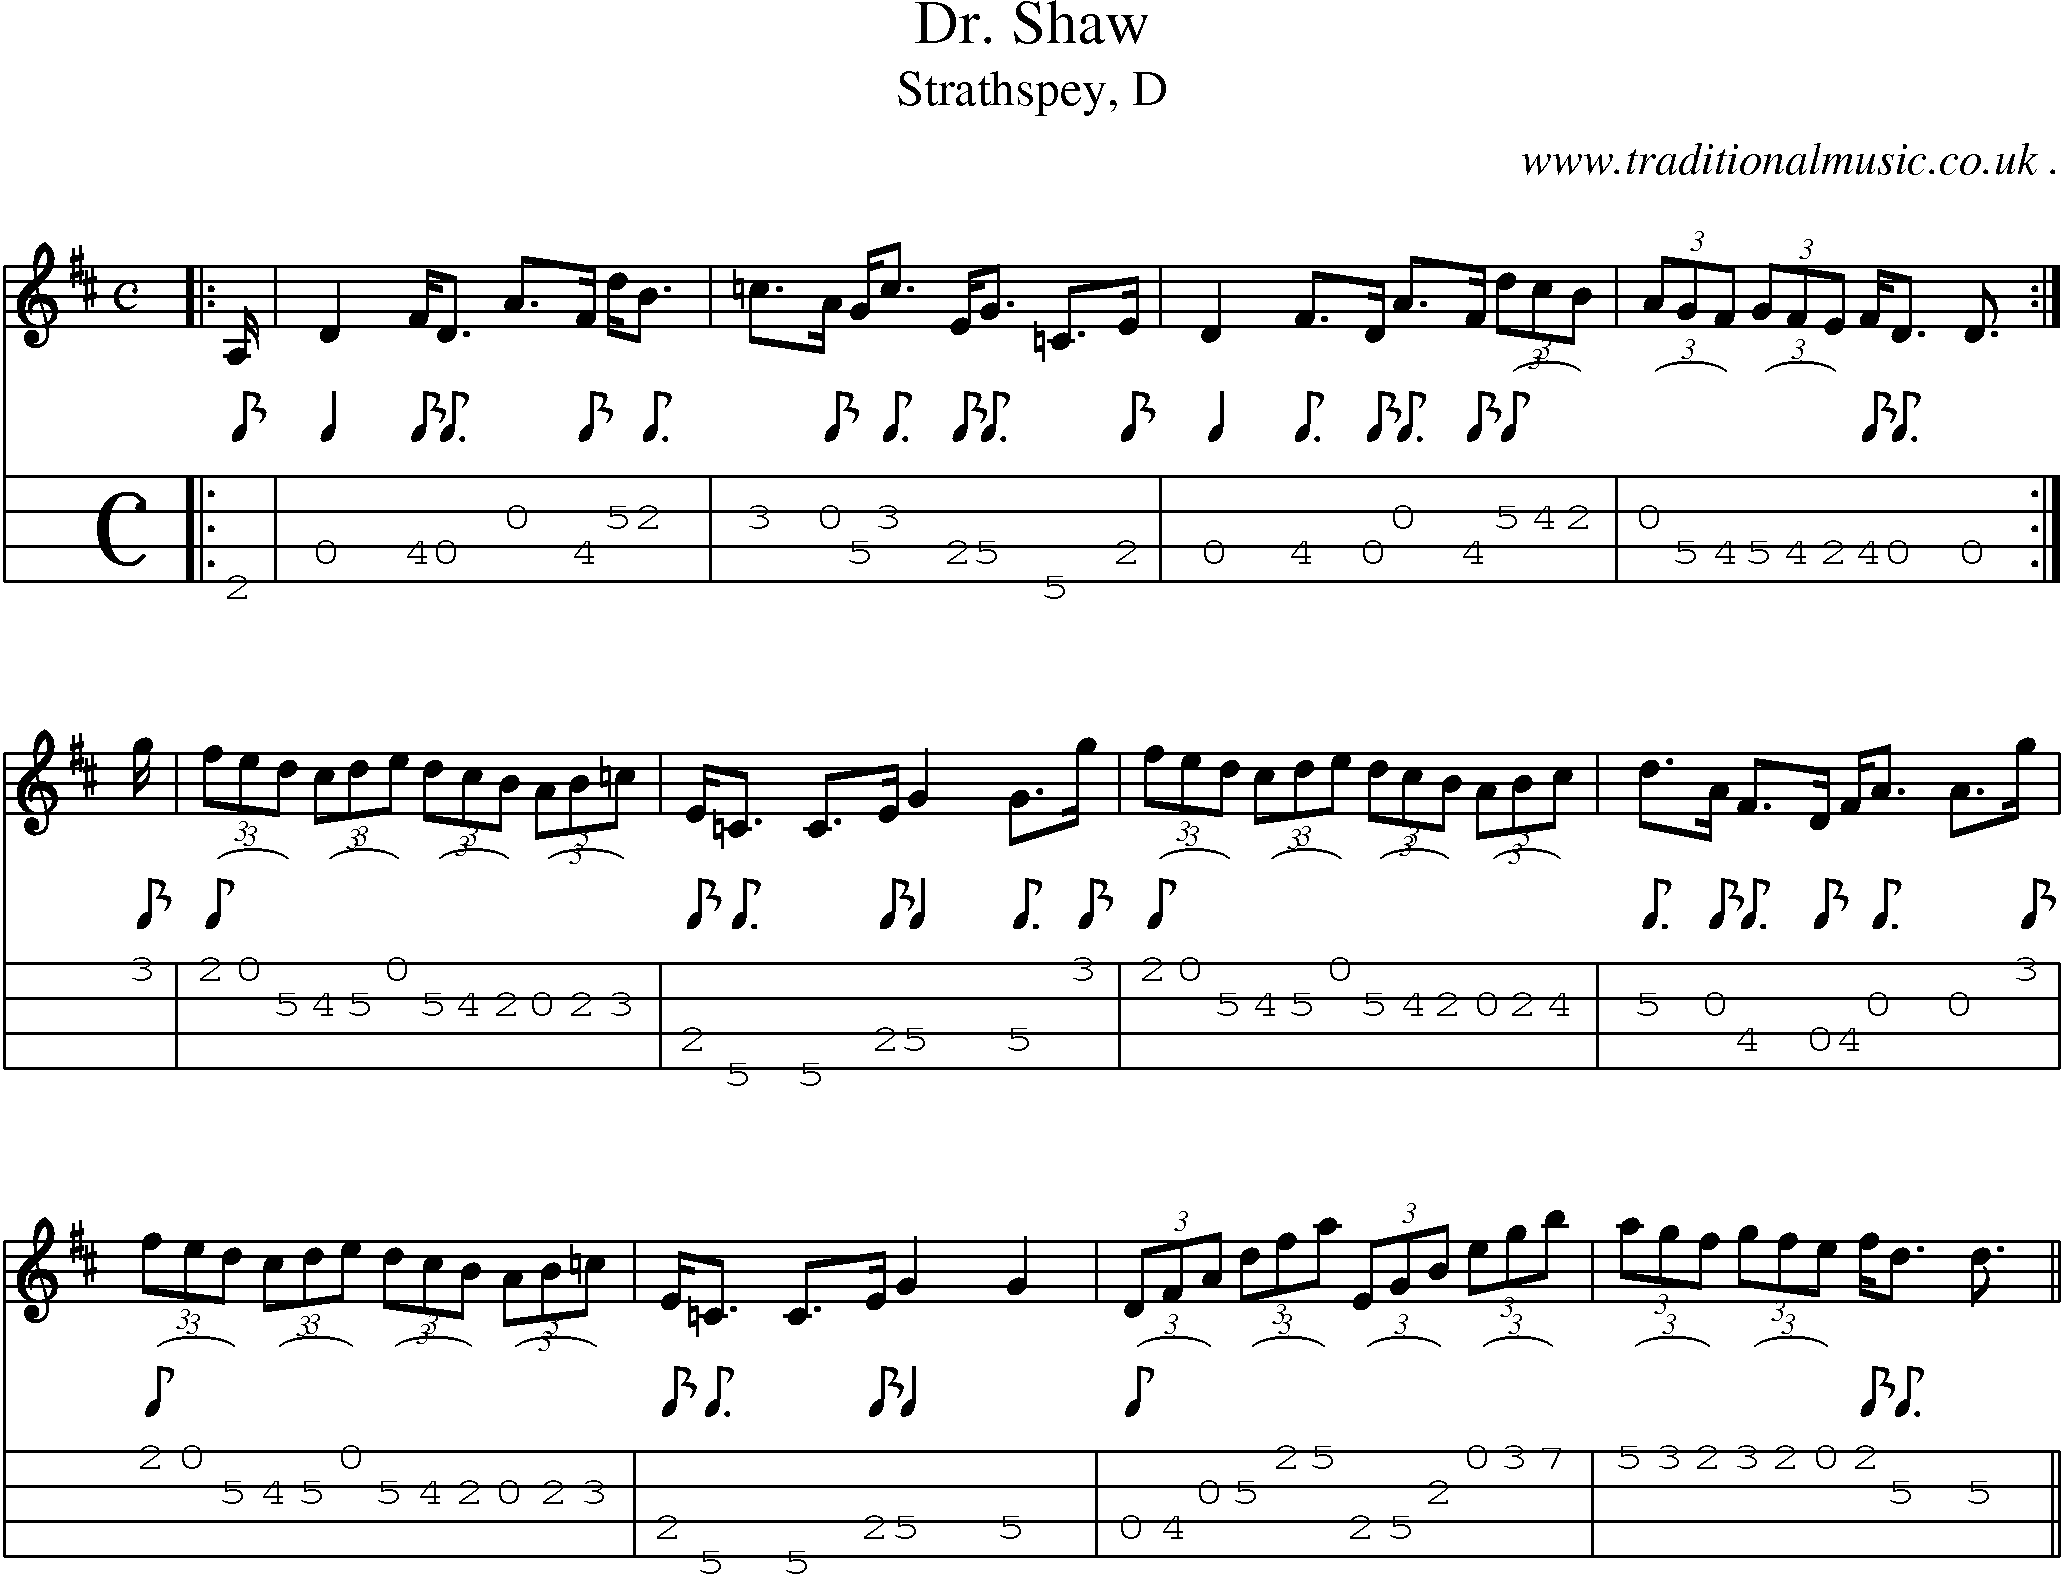 Sheet-music  score, Chords and Mandolin Tabs for Dr Shaw